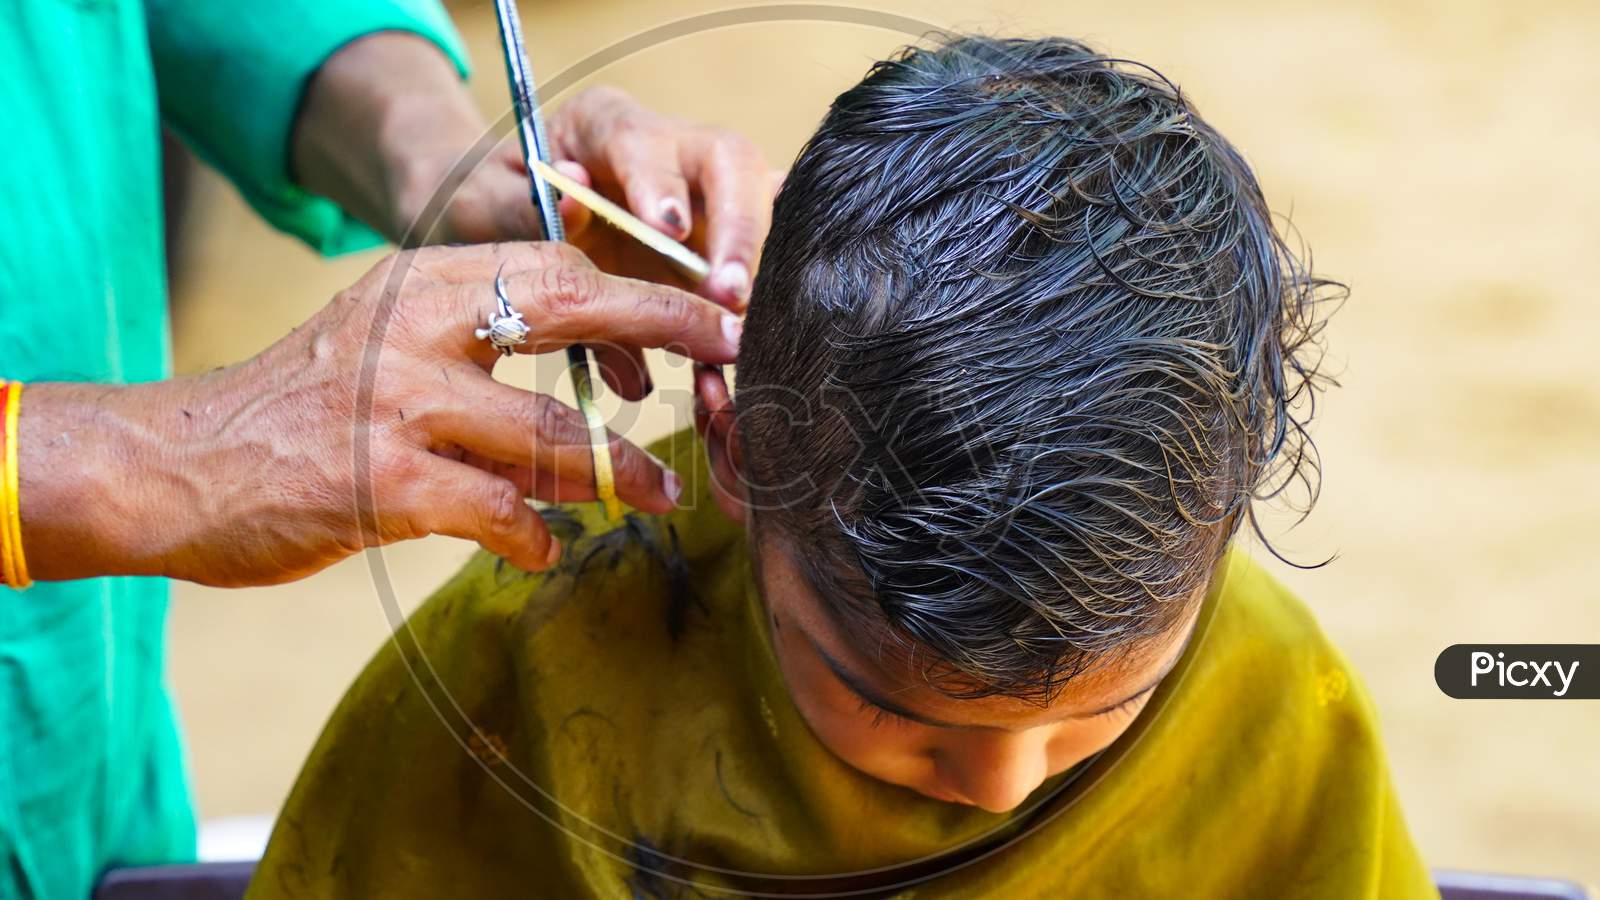 Dabwali, Haryana: Barbers from India turn heads with haircuts featuring  customers' favourite celebrities | The Independent